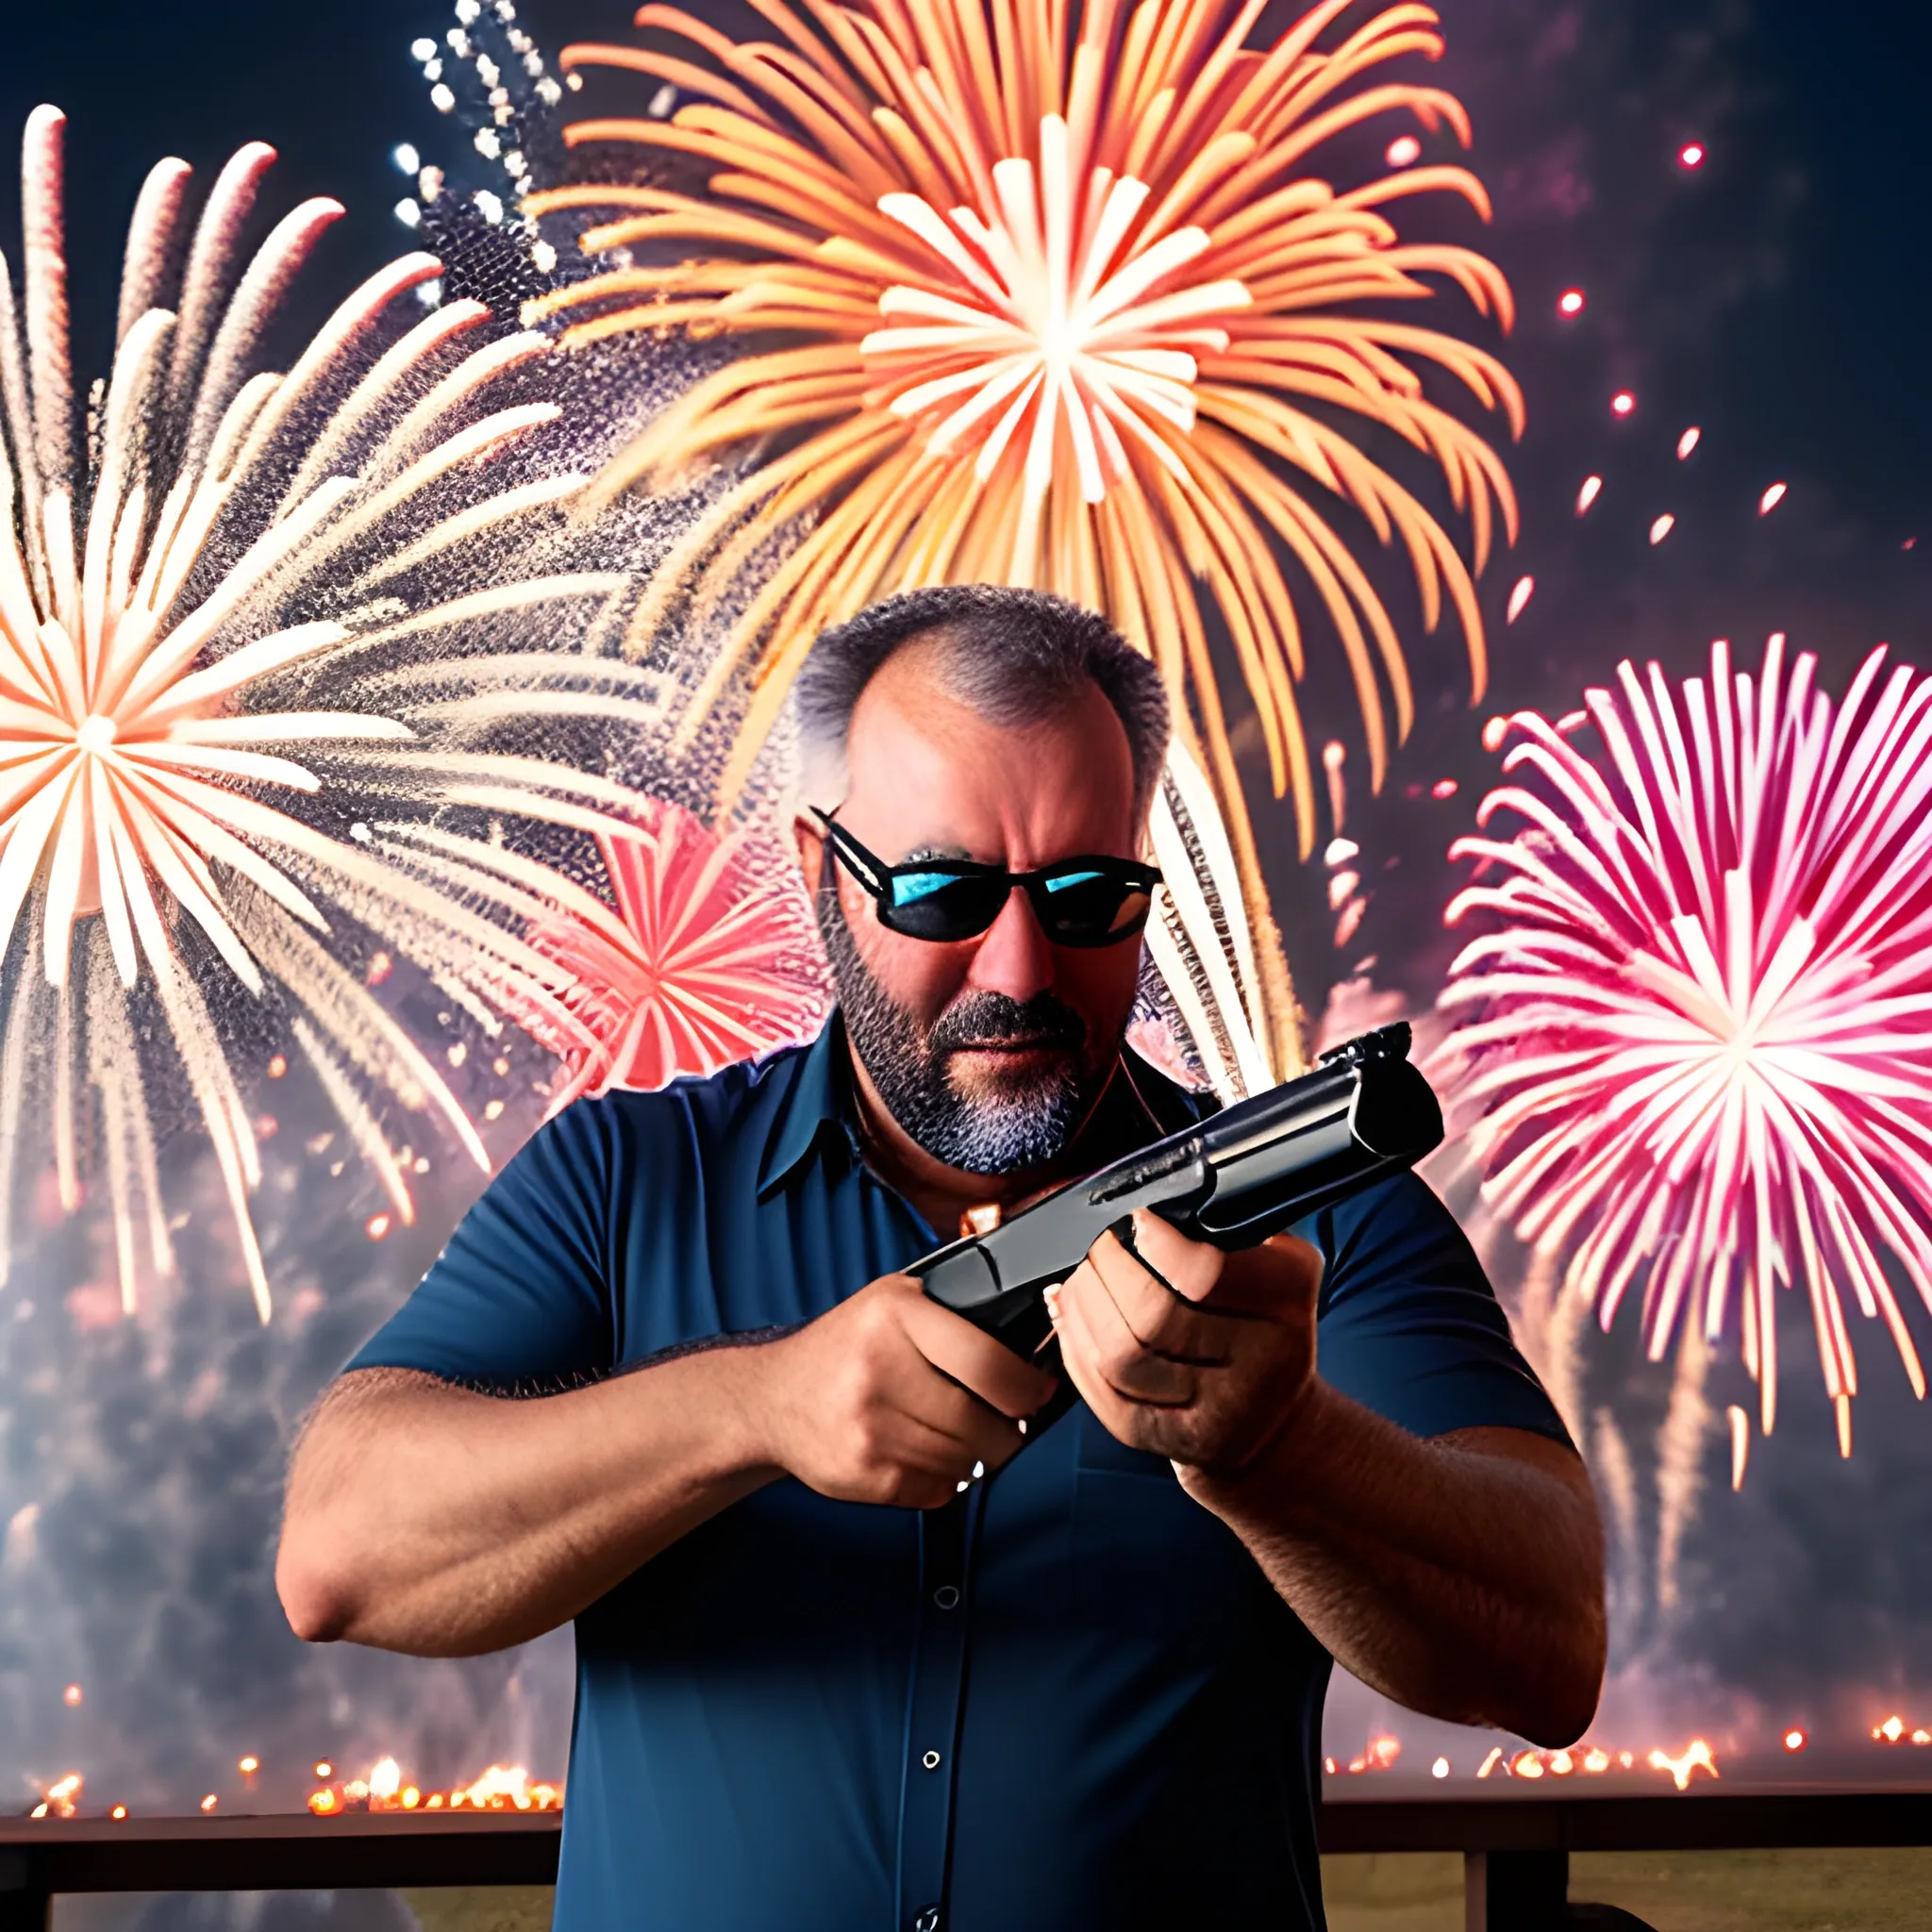 an uncle playing with fireworks and guns and babies